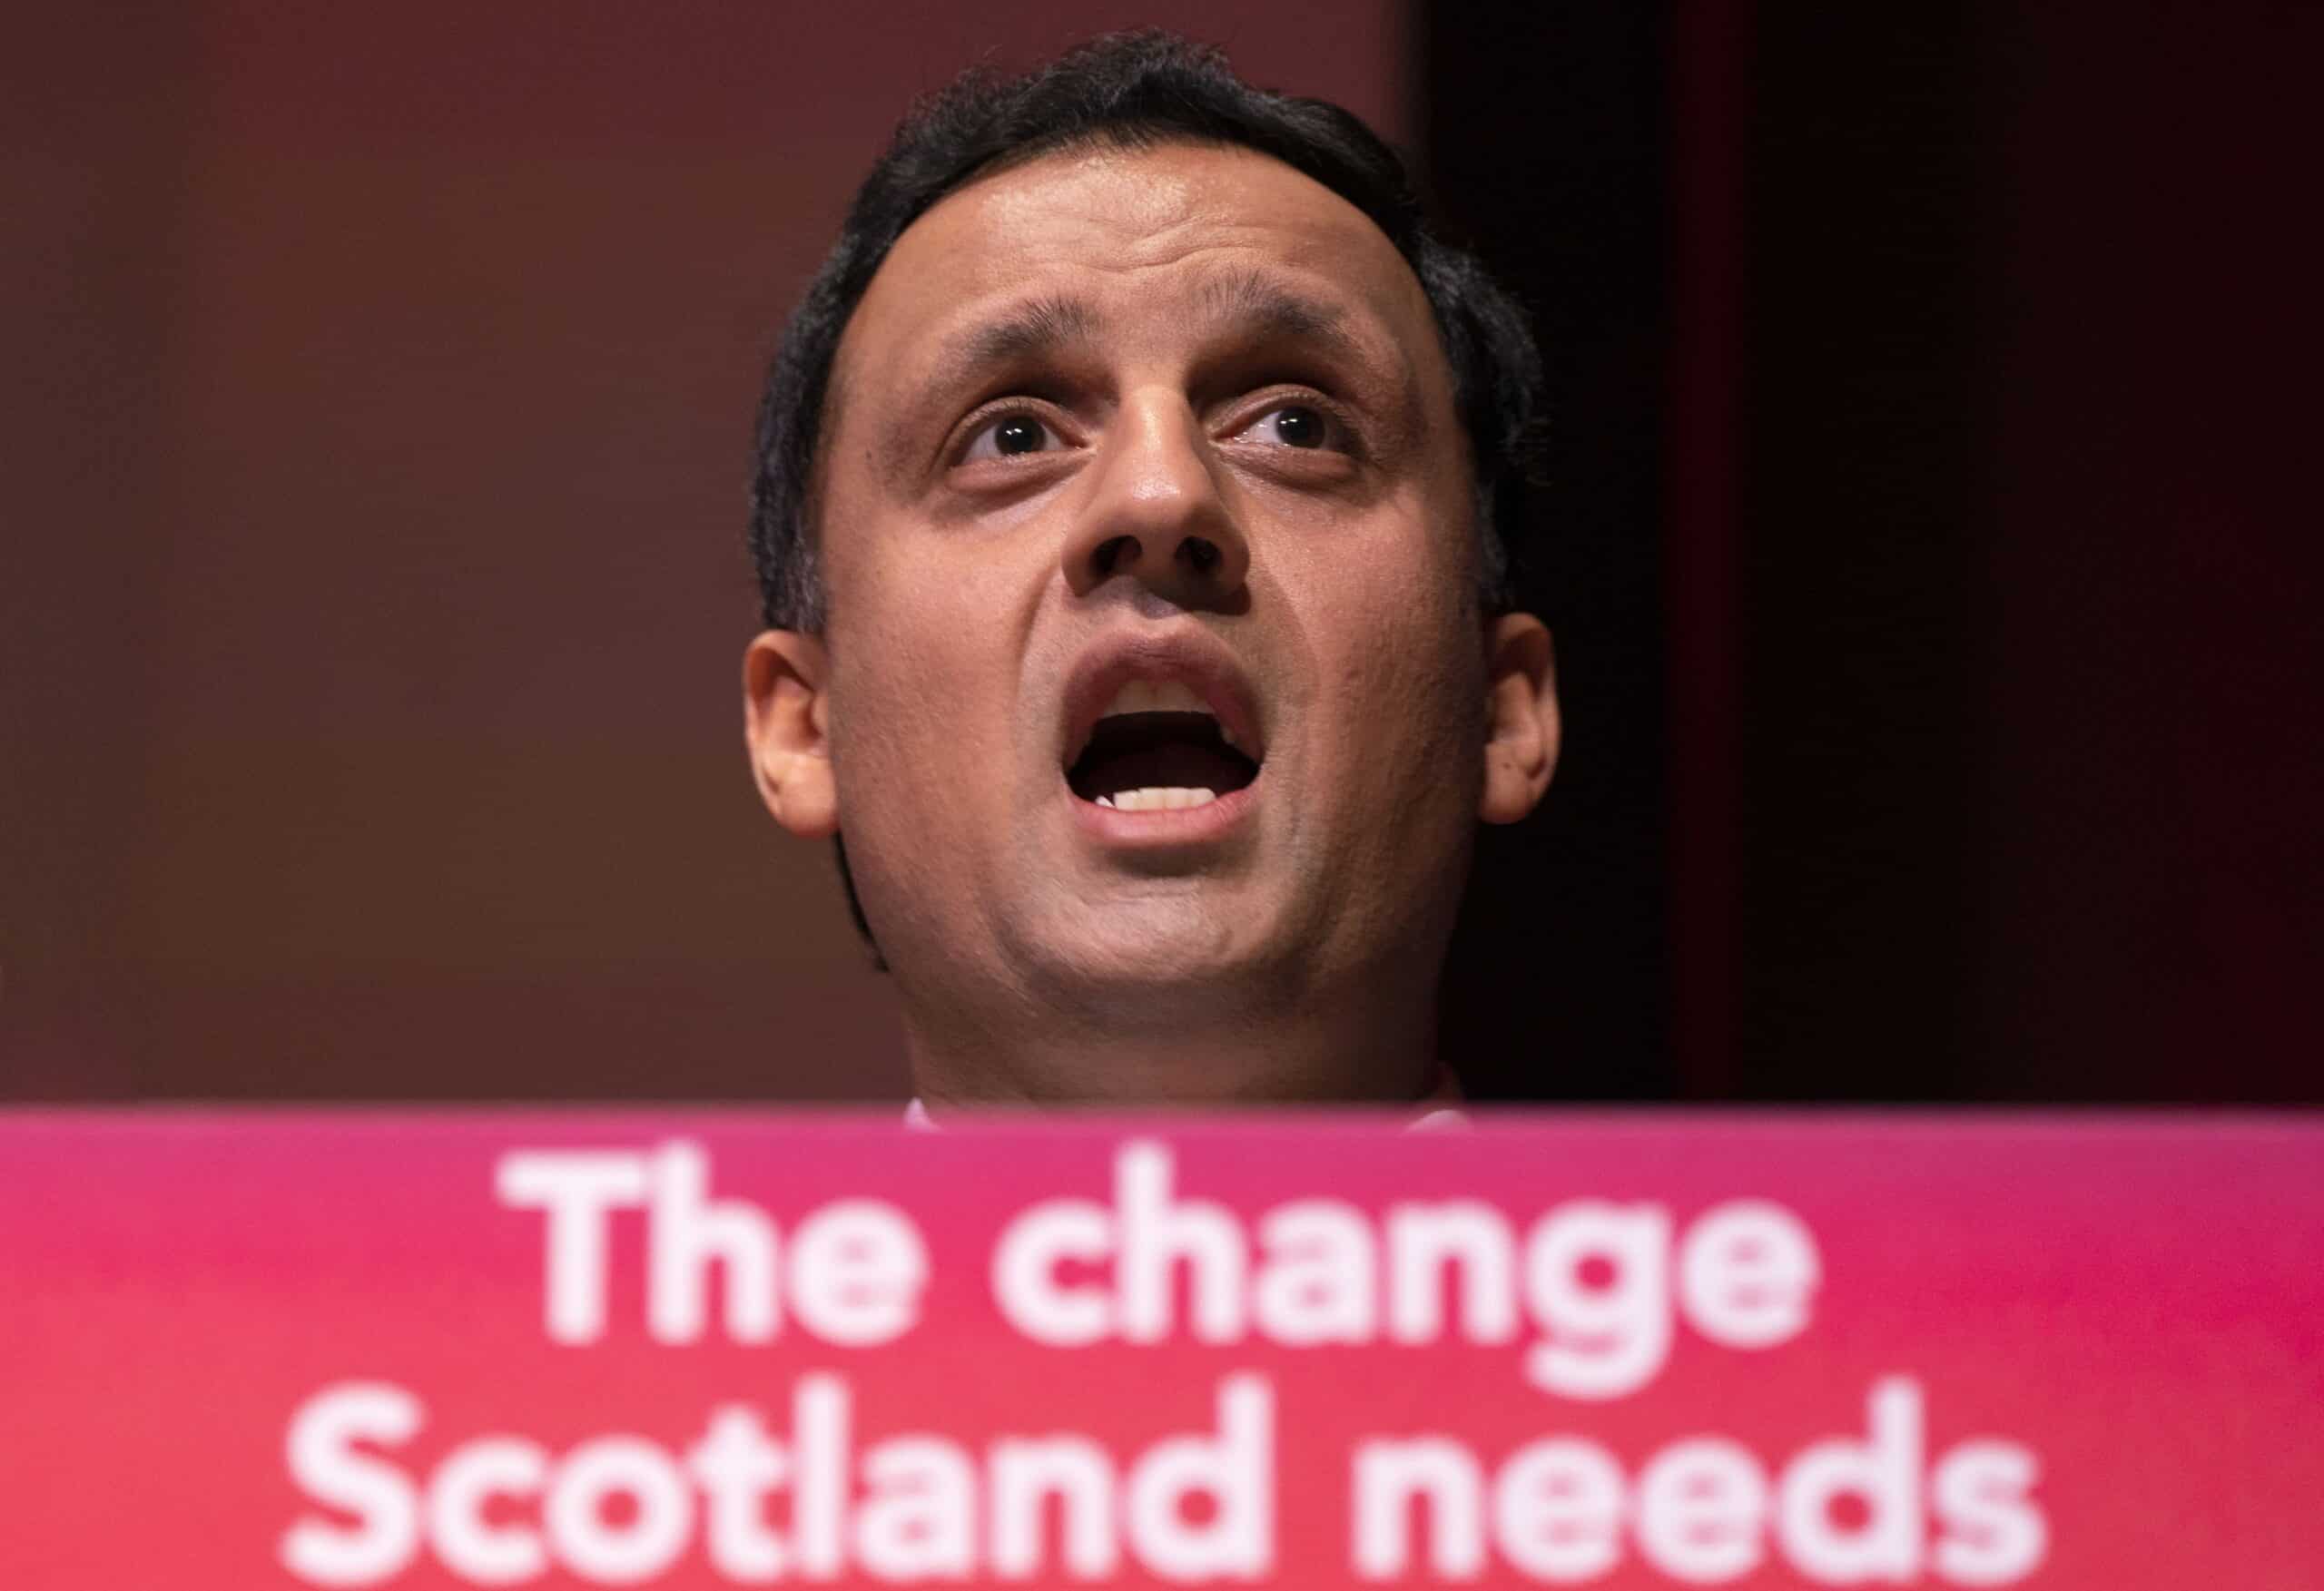 Five more years of Tory Government would be ‘unbearable nightmare’ – Sarwar